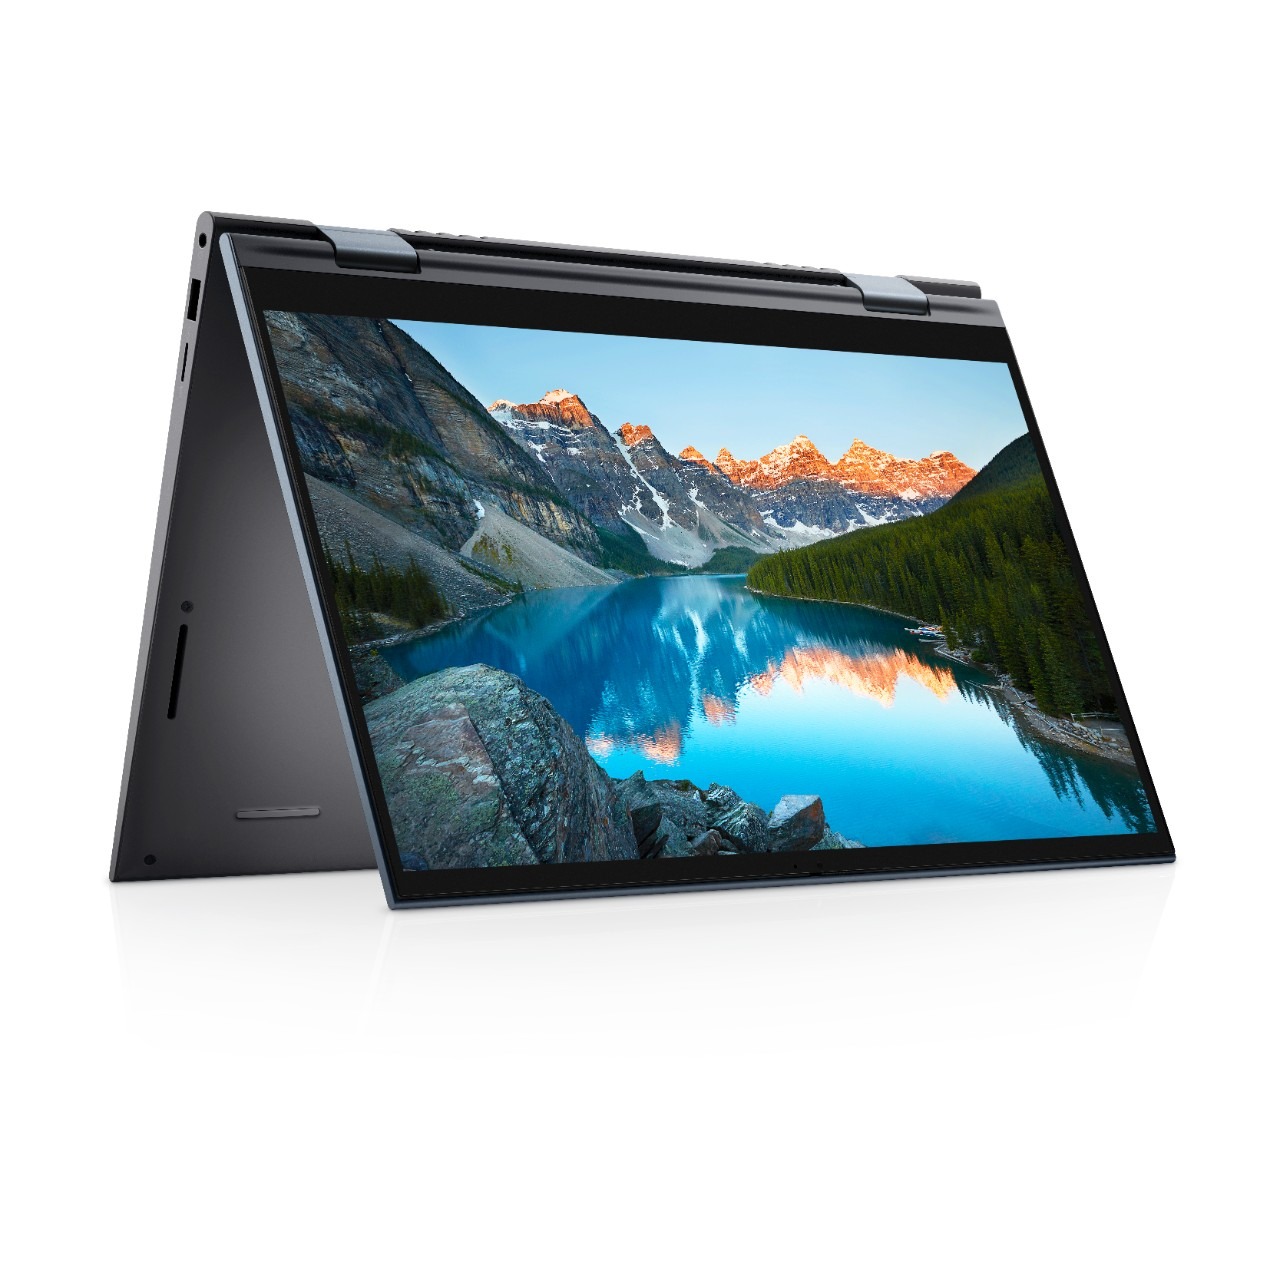 Inspiron 14” 7000 (7415) 2-in-1